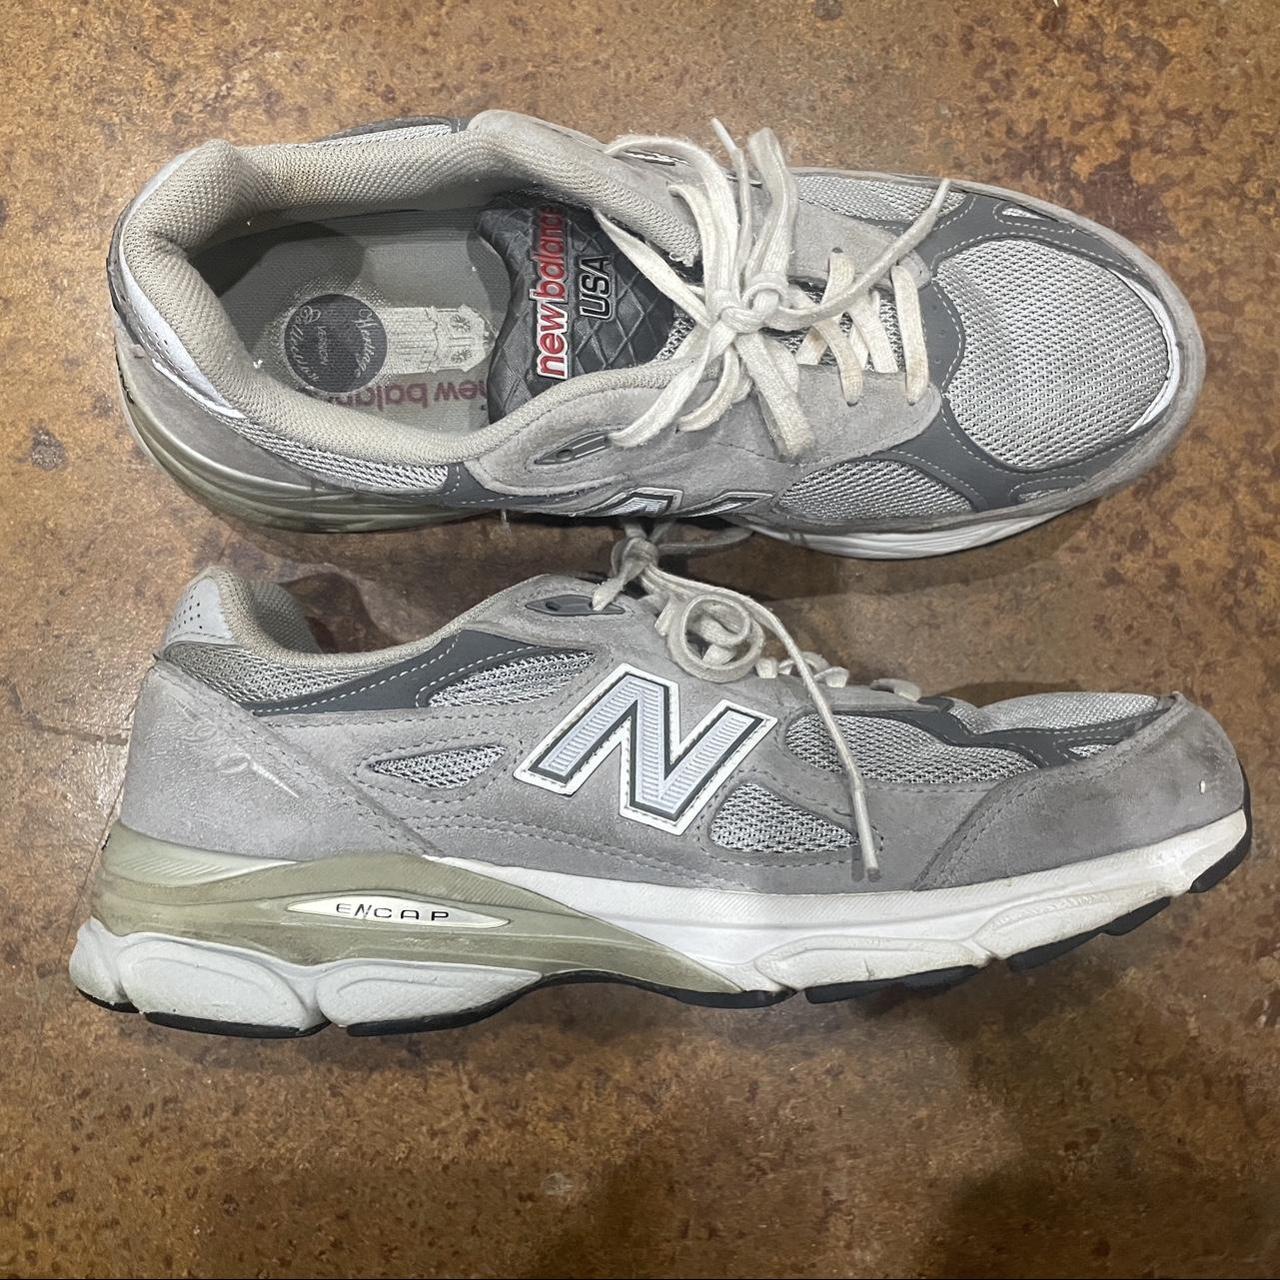 New Balance Men's Grey and White Trainers